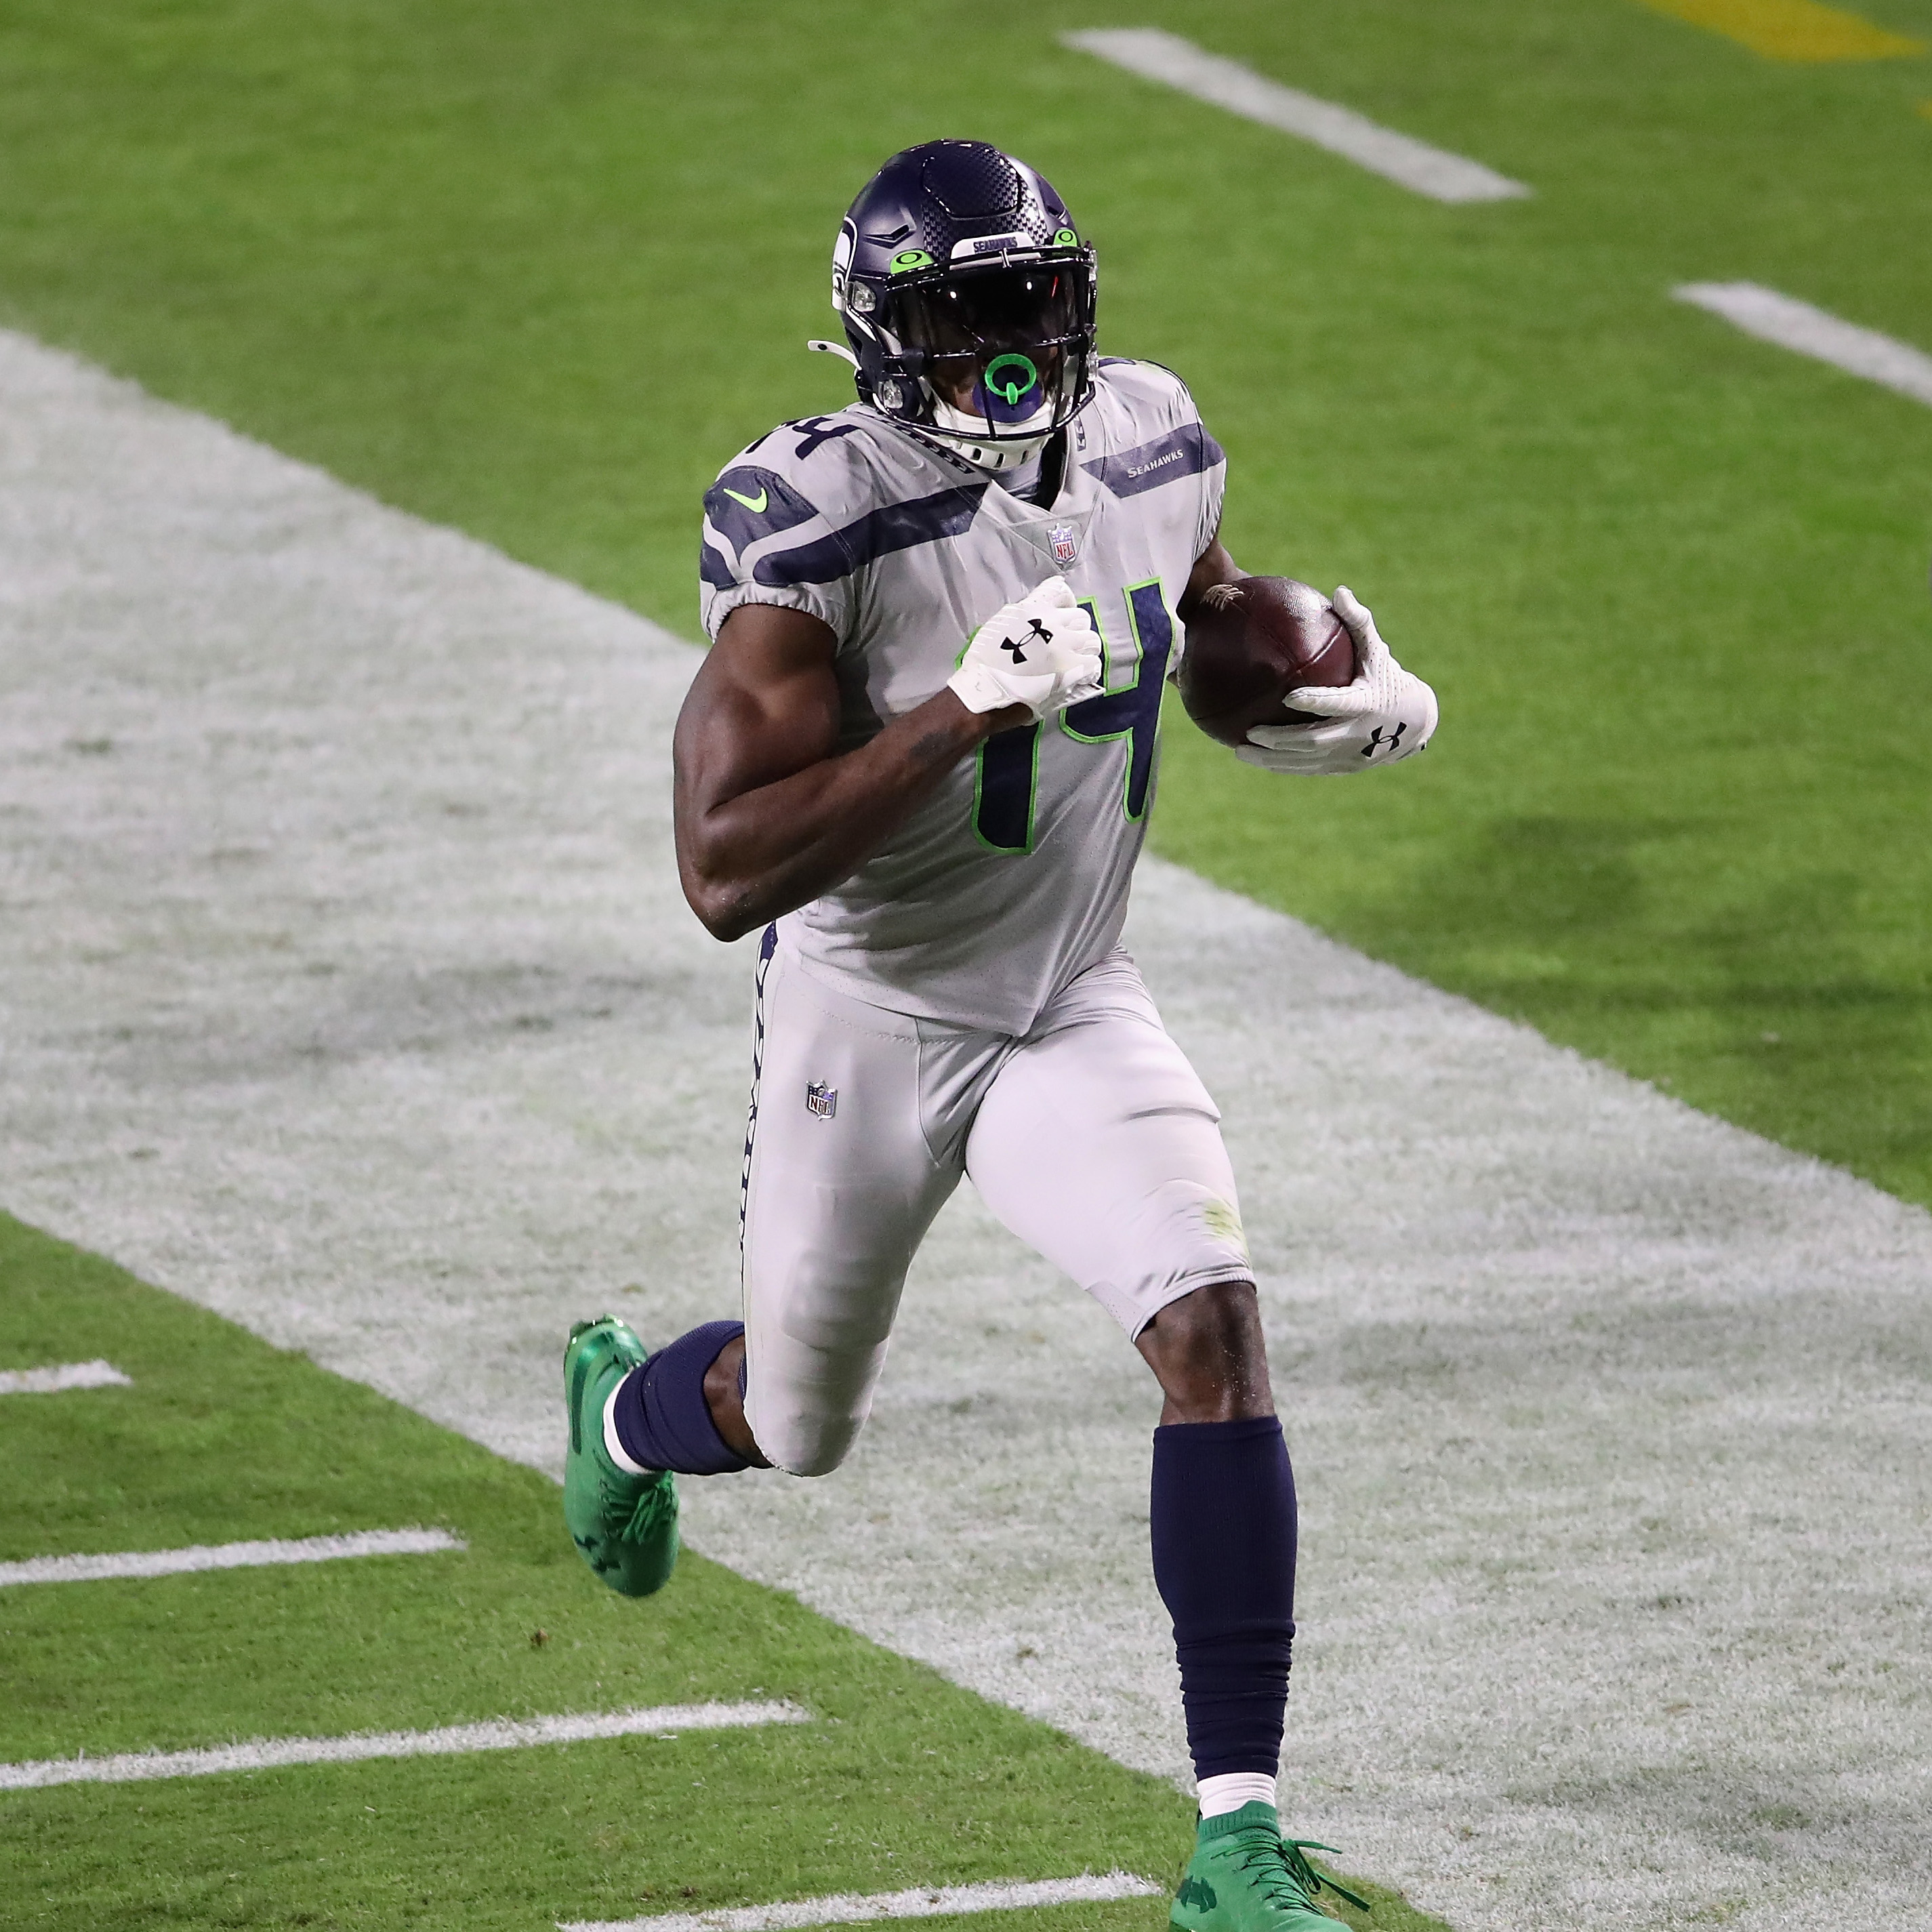 Does the Seahawks' DK Metcalf really have a shot to qualify for